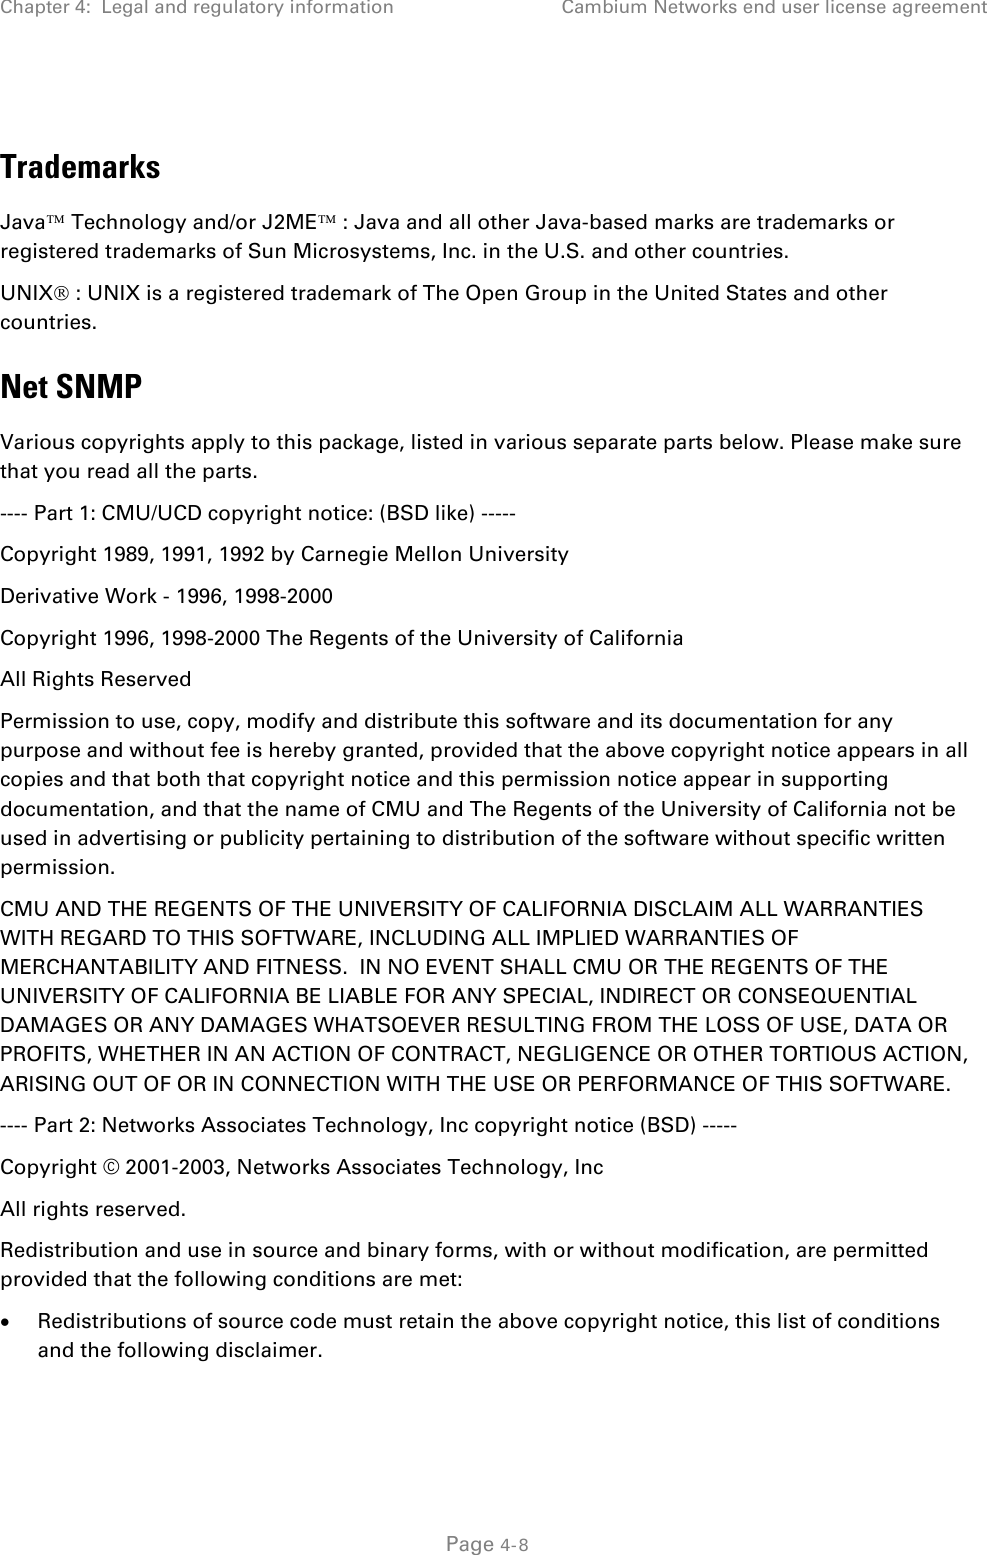 Chapter 4:  Legal and regulatory information Cambium Networks end user license agreement   Trademarks Java Technology and/or J2ME : Java and all other Java-based marks are trademarks or registered trademarks of Sun Microsystems, Inc. in the U.S. and other countries.  UNIX : UNIX is a registered trademark of The Open Group in the United States and other countries. Net SNMP Various copyrights apply to this package, listed in various separate parts below. Please make sure that you read all the parts. ---- Part 1: CMU/UCD copyright notice: (BSD like) ----- Copyright 1989, 1991, 1992 by Carnegie Mellon University Derivative Work - 1996, 1998-2000 Copyright 1996, 1998-2000 The Regents of the University of California All Rights Reserved Permission to use, copy, modify and distribute this software and its documentation for any purpose and without fee is hereby granted, provided that the above copyright notice appears in all copies and that both that copyright notice and this permission notice appear in supporting documentation, and that the name of CMU and The Regents of the University of California not be used in advertising or publicity pertaining to distribution of the software without specific written permission. CMU AND THE REGENTS OF THE UNIVERSITY OF CALIFORNIA DISCLAIM ALL WARRANTIES WITH REGARD TO THIS SOFTWARE, INCLUDING ALL IMPLIED WARRANTIES OF MERCHANTABILITY AND FITNESS.  IN NO EVENT SHALL CMU OR THE REGENTS OF THE UNIVERSITY OF CALIFORNIA BE LIABLE FOR ANY SPECIAL, INDIRECT OR CONSEQUENTIAL DAMAGES OR ANY DAMAGES WHATSOEVER RESULTING FROM THE LOSS OF USE, DATA OR PROFITS, WHETHER IN AN ACTION OF CONTRACT, NEGLIGENCE OR OTHER TORTIOUS ACTION, ARISING OUT OF OR IN CONNECTION WITH THE USE OR PERFORMANCE OF THIS SOFTWARE. ---- Part 2: Networks Associates Technology, Inc copyright notice (BSD) ----- Copyright © 2001-2003, Networks Associates Technology, Inc All rights reserved. Redistribution and use in source and binary forms, with or without modification, are permitted provided that the following conditions are met: • Redistributions of source code must retain the above copyright notice, this list of conditions and the following disclaimer.  Page 4-8 